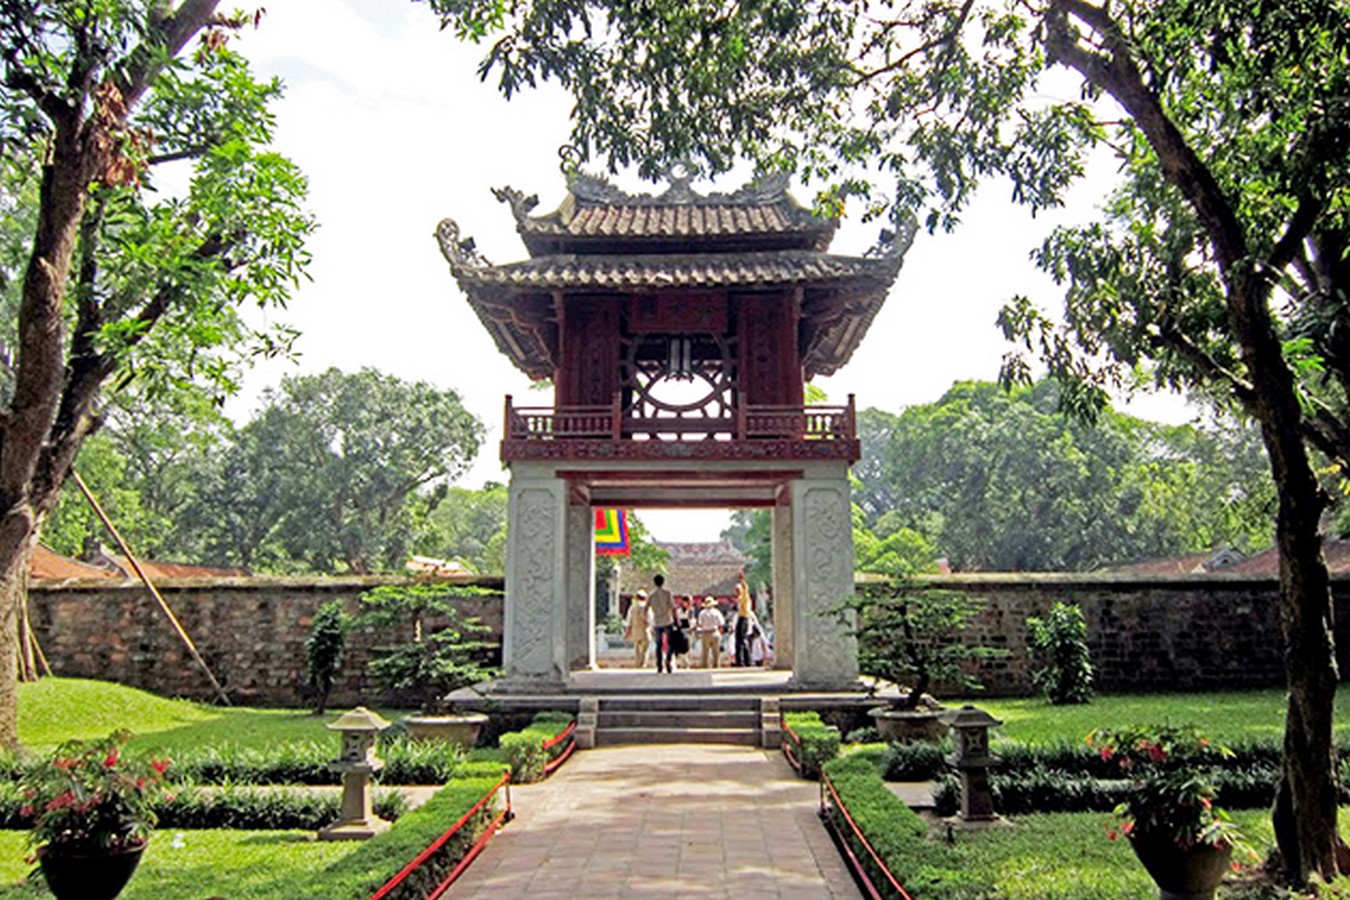 TEMPLE OF LITERATURE AND NATIONAL UNIVERSITY, HANOI - Sheet1